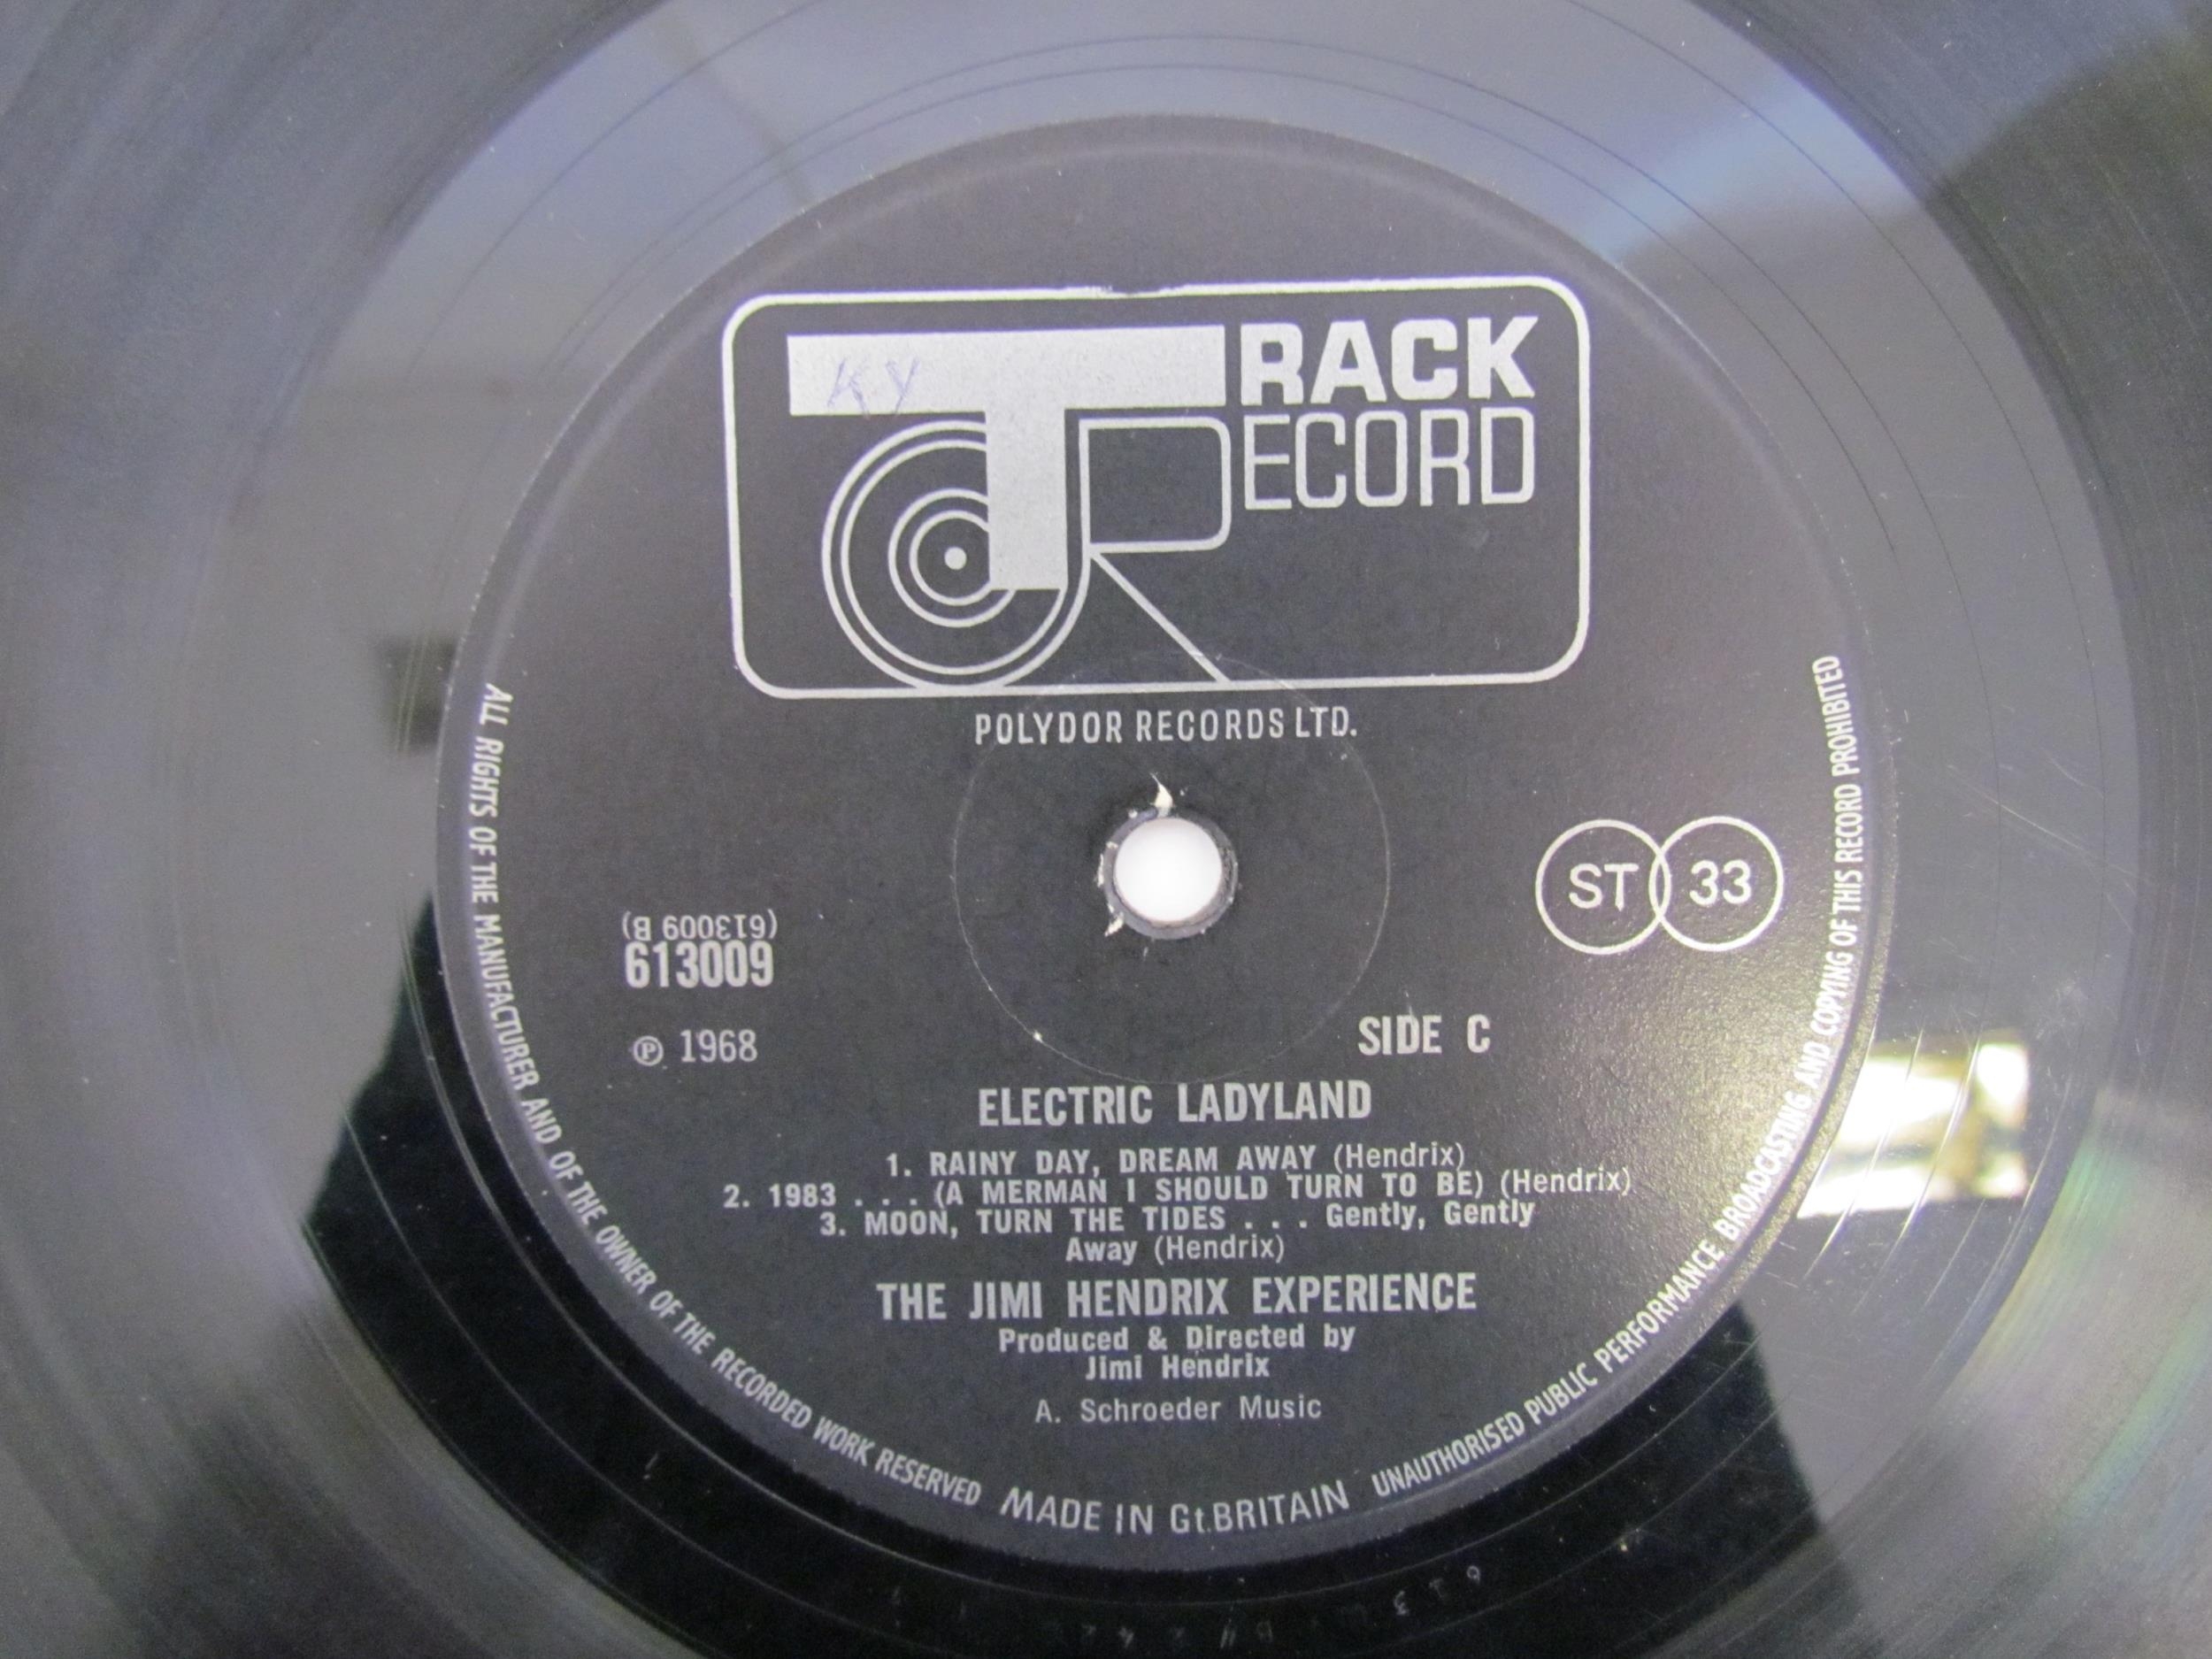 THE JIMI HENDRIX EXPERIENCE: 'Electric Ladyland' double LP, original UK pressing on Track Record, - Image 6 of 9